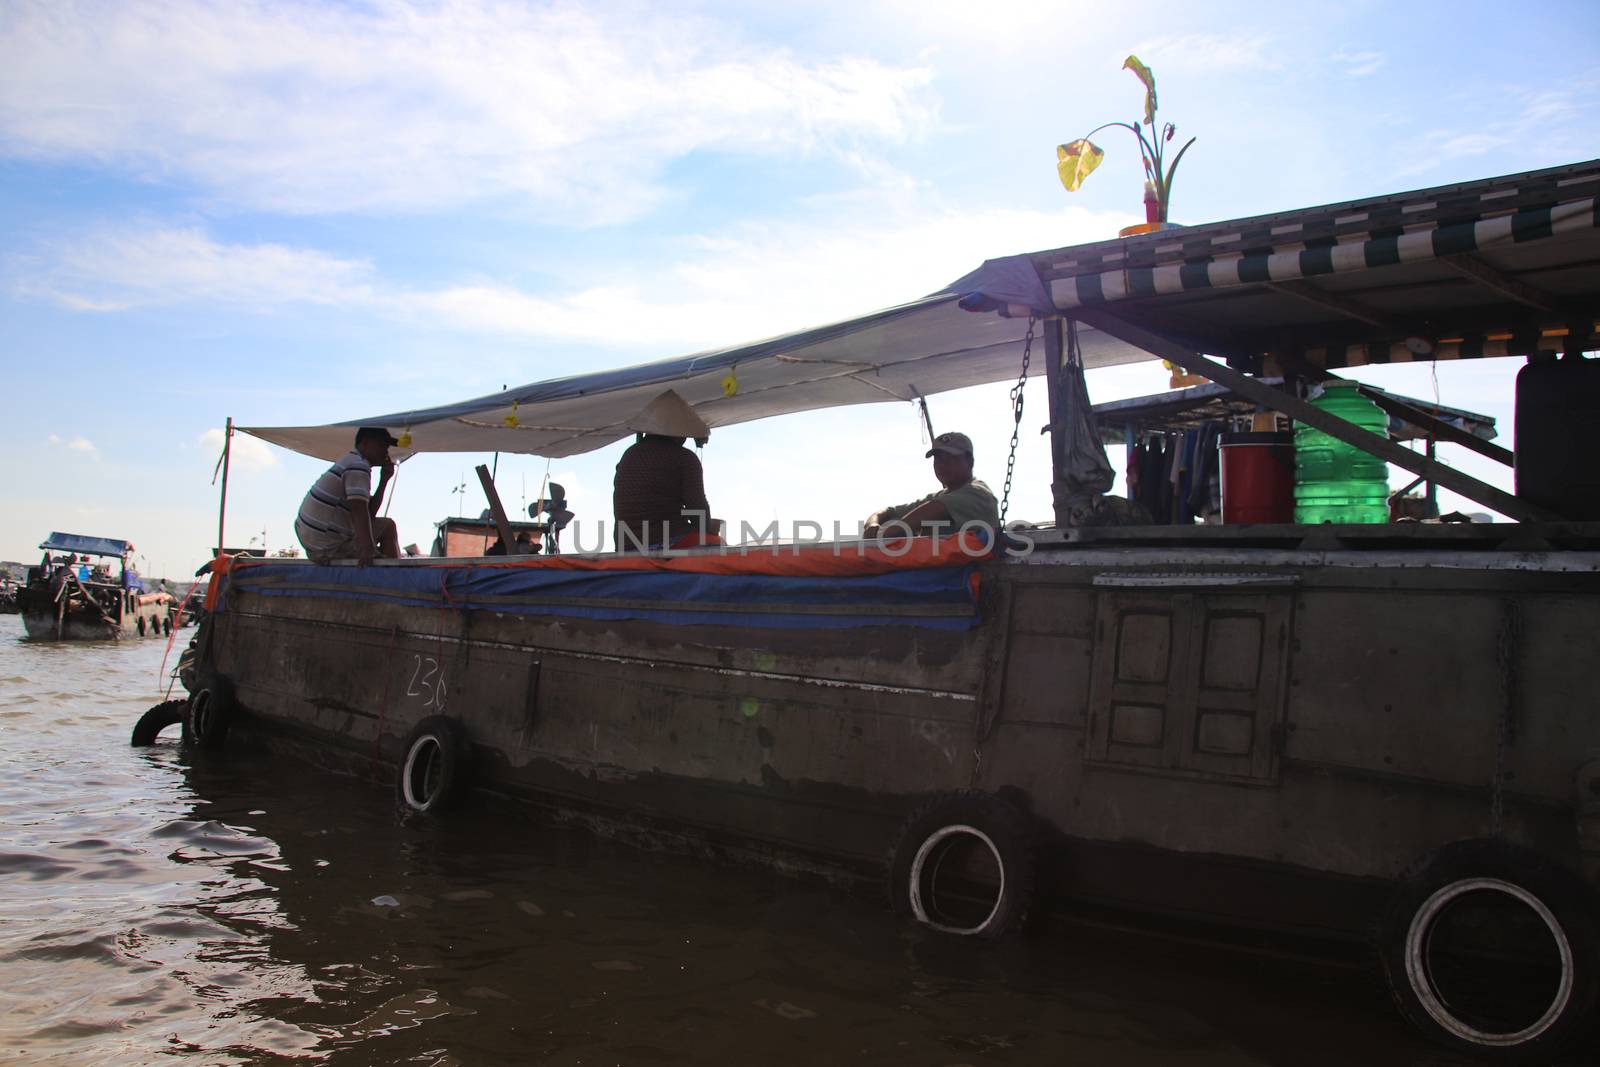 Editorial. Merchants in a boat in Cai Rang Floating Market in Can tho, Vietnam